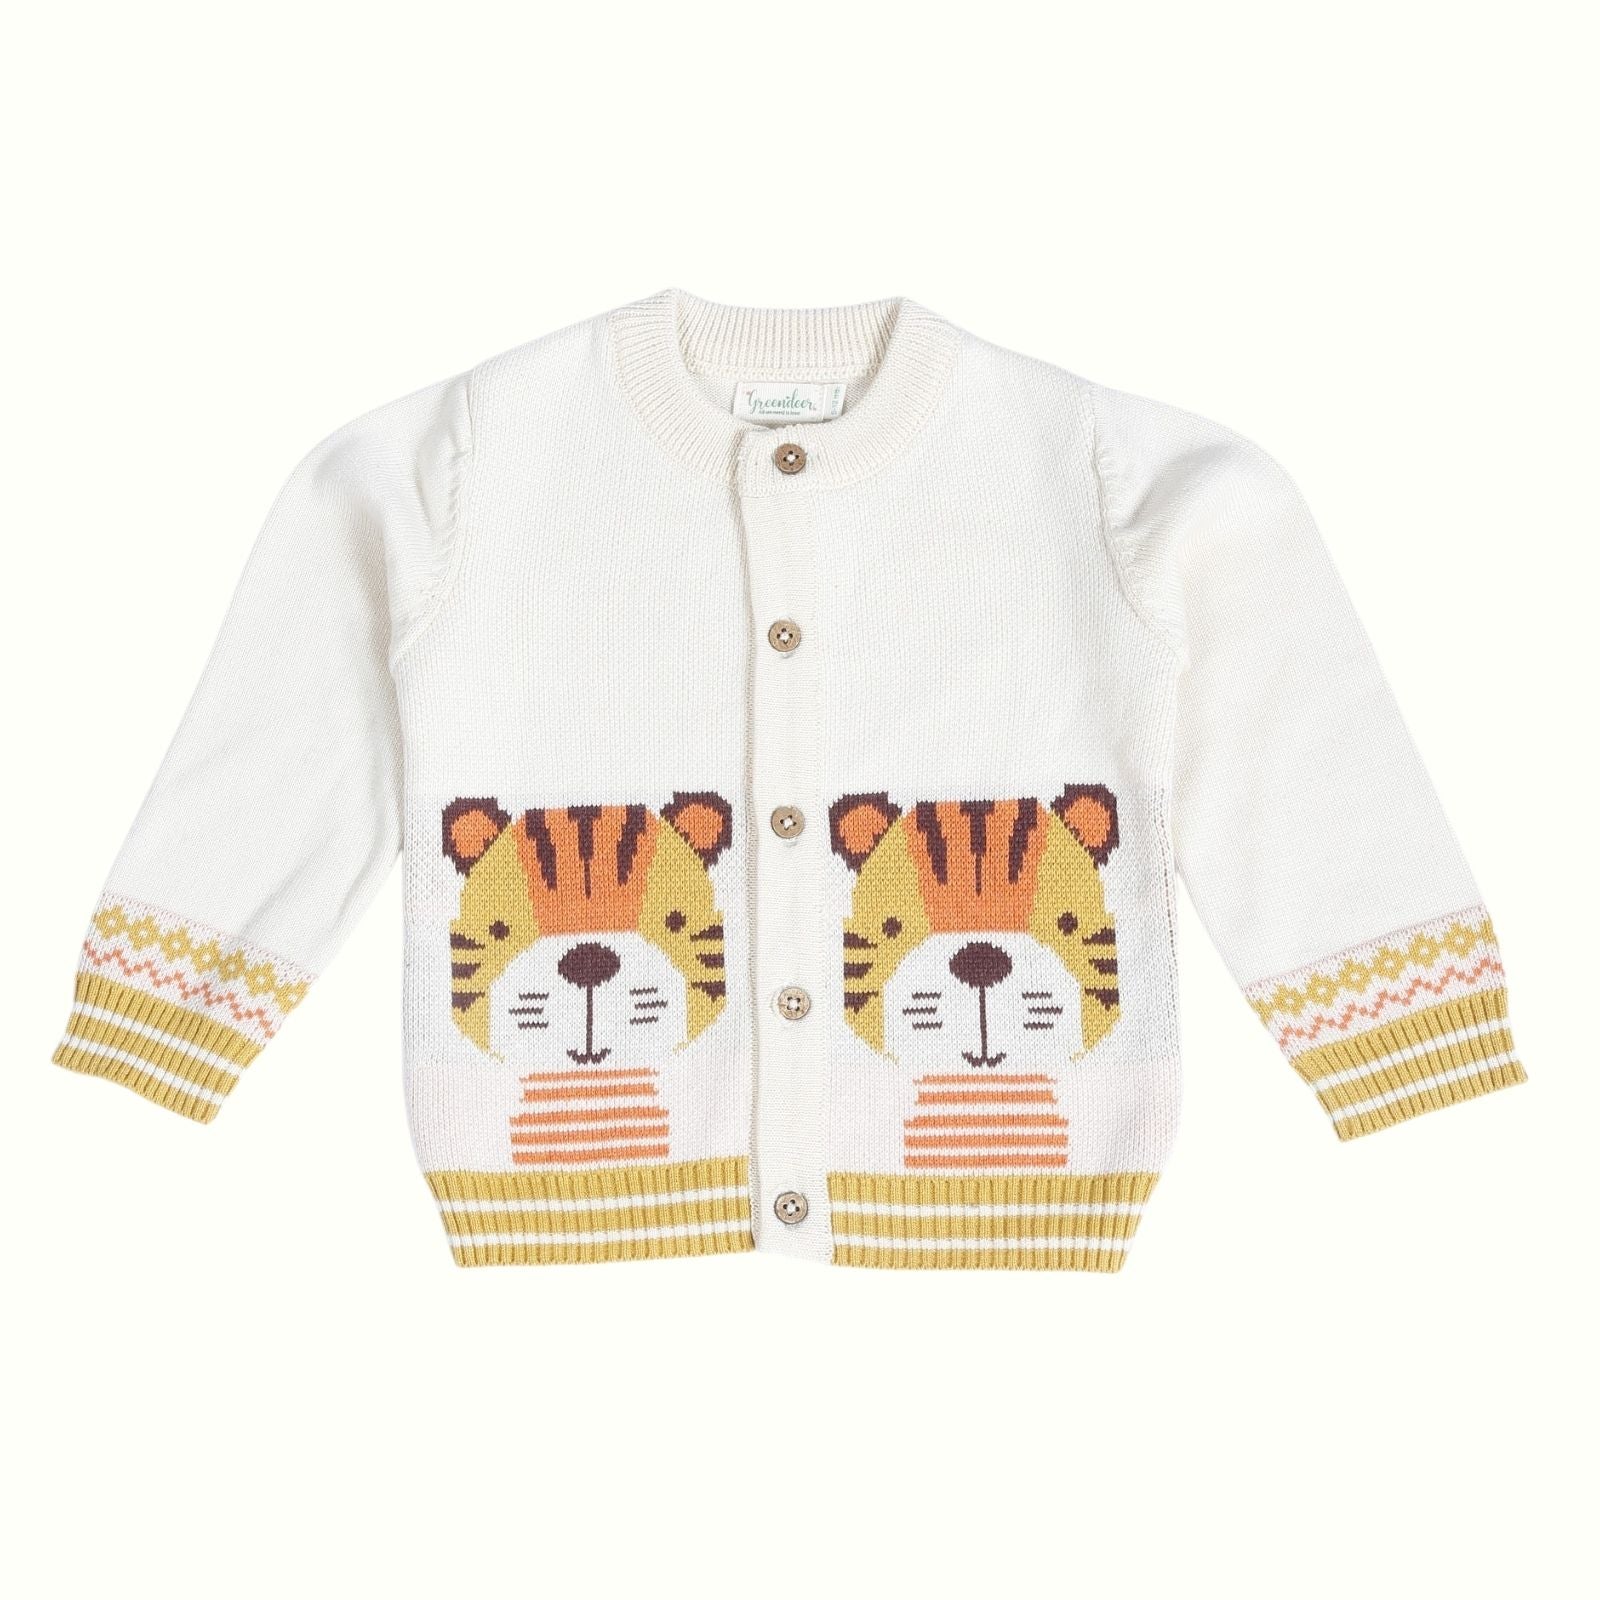 Greendeer Adorable Tiger Jacquard 100% Cotton Sweater with Lower - Crème & Mimosa Yellow - Set of 2